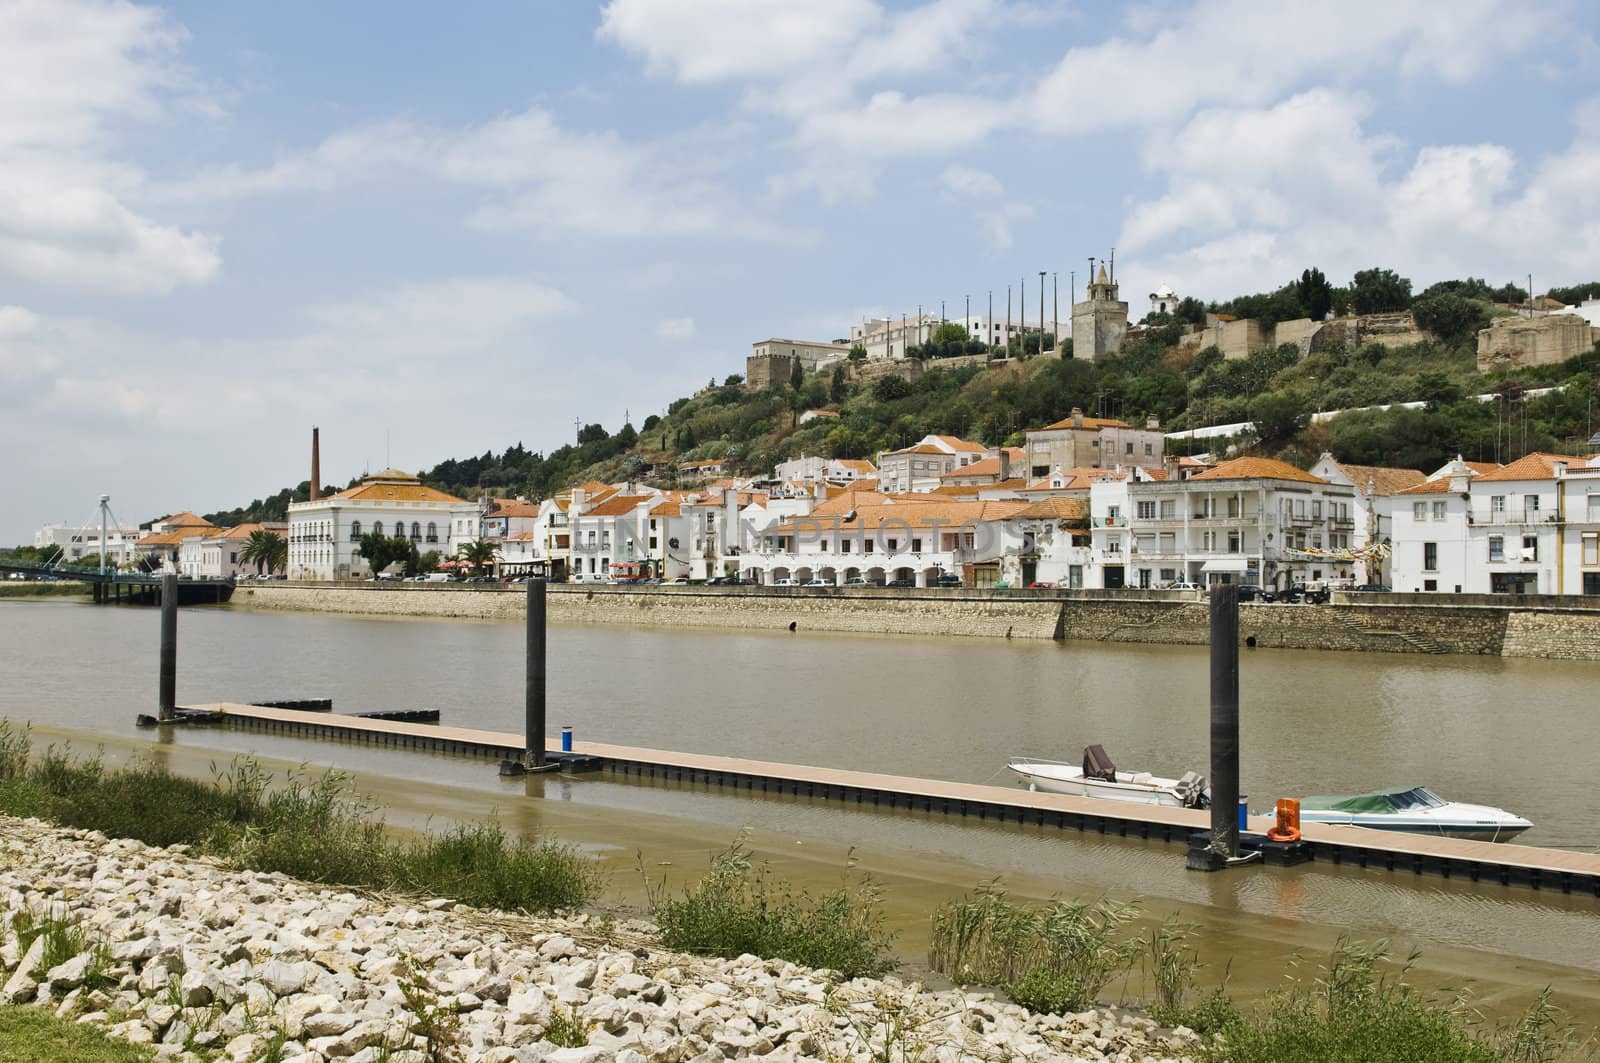 View of the historic town of Alcacer do Sal and the river Sado, Alentejo, Portugal
